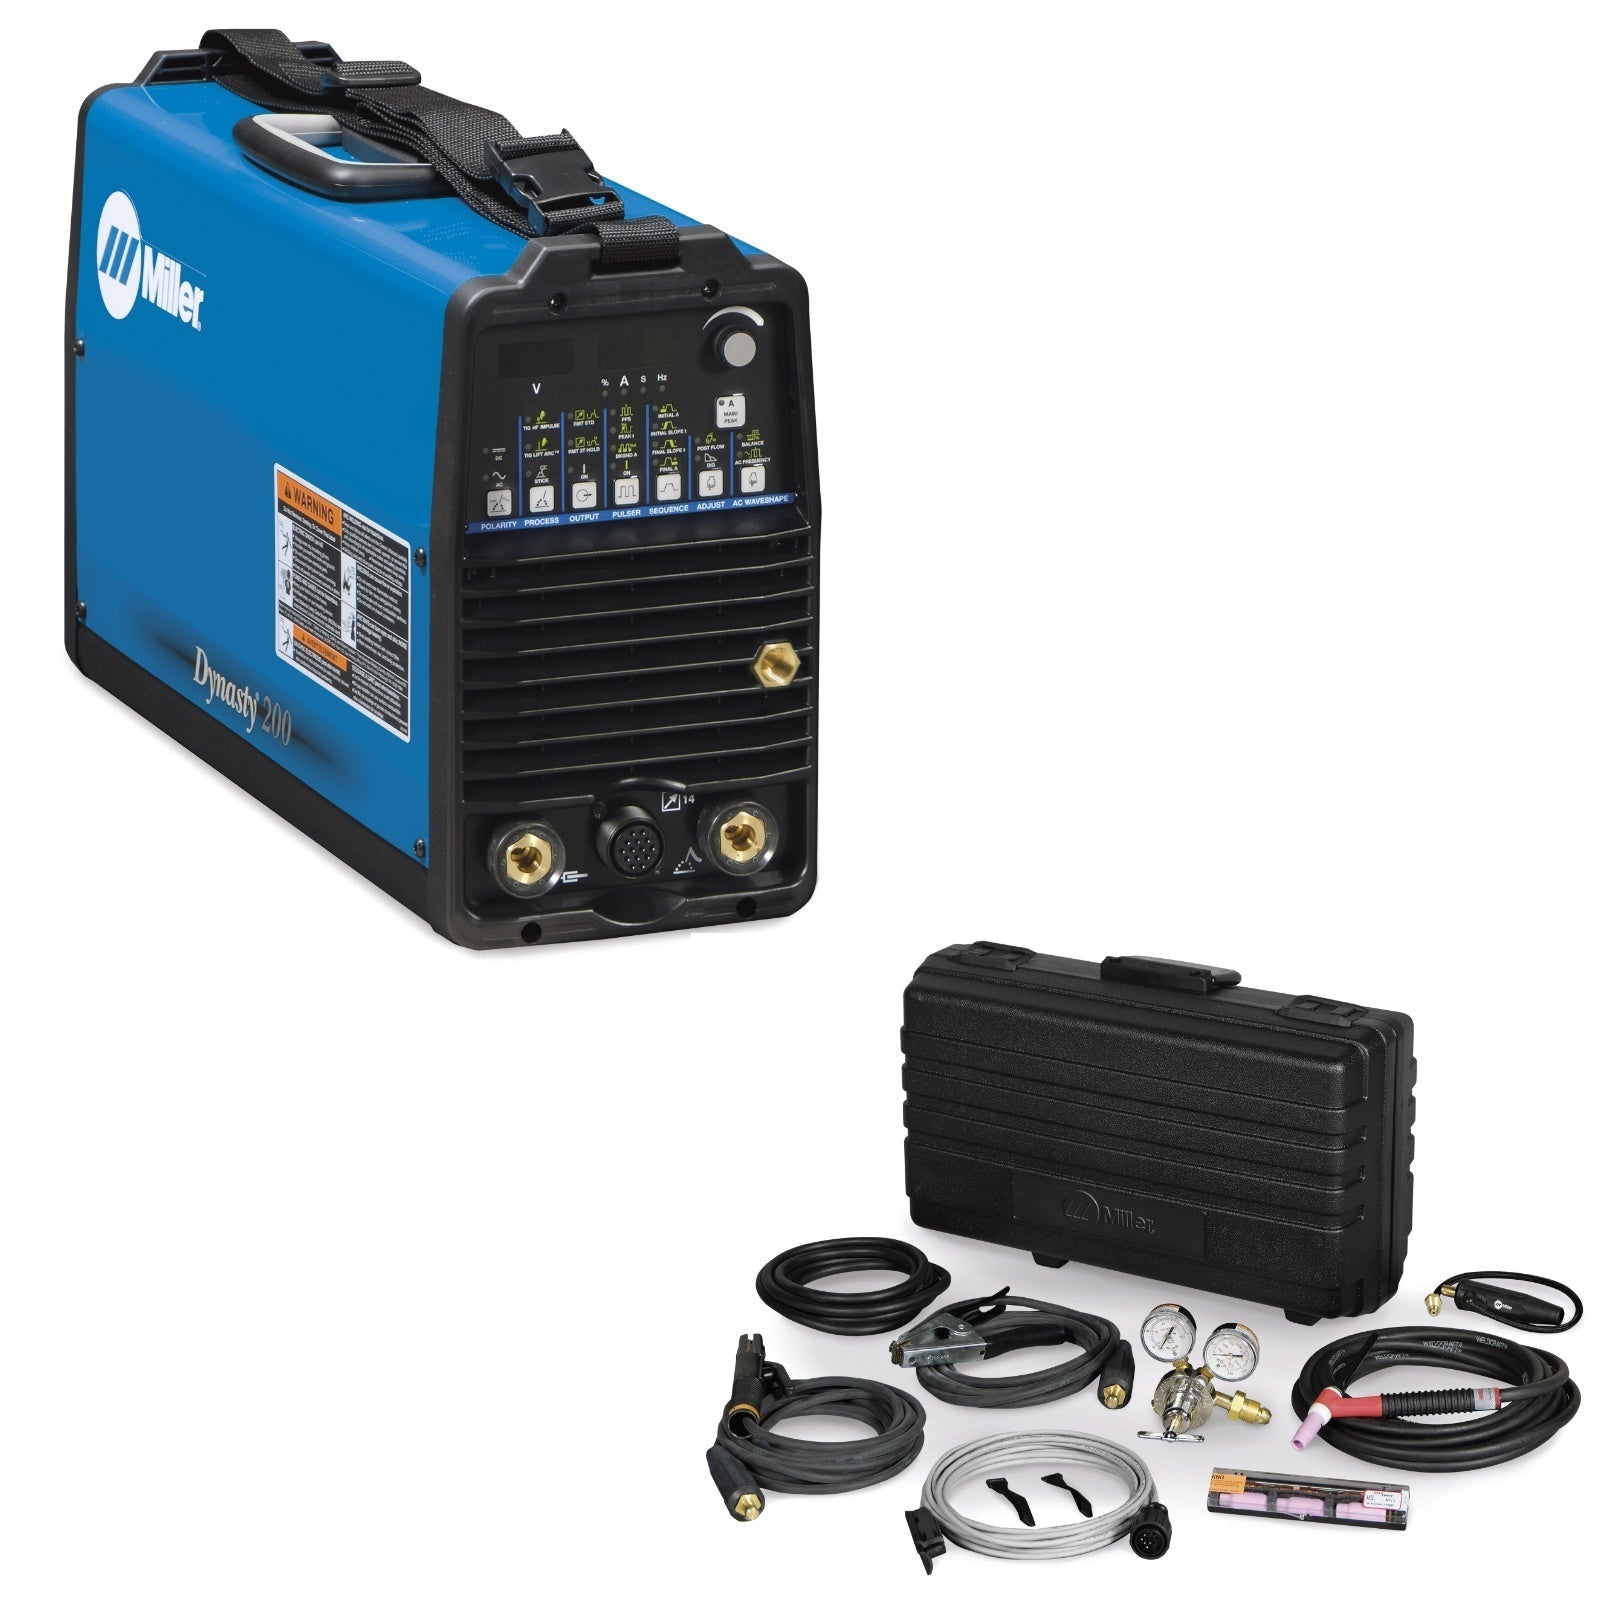 Miller Dynasty 200 DX TIG Welder and Air-Cooled Contractor Kit with Fingertip Control (951175)